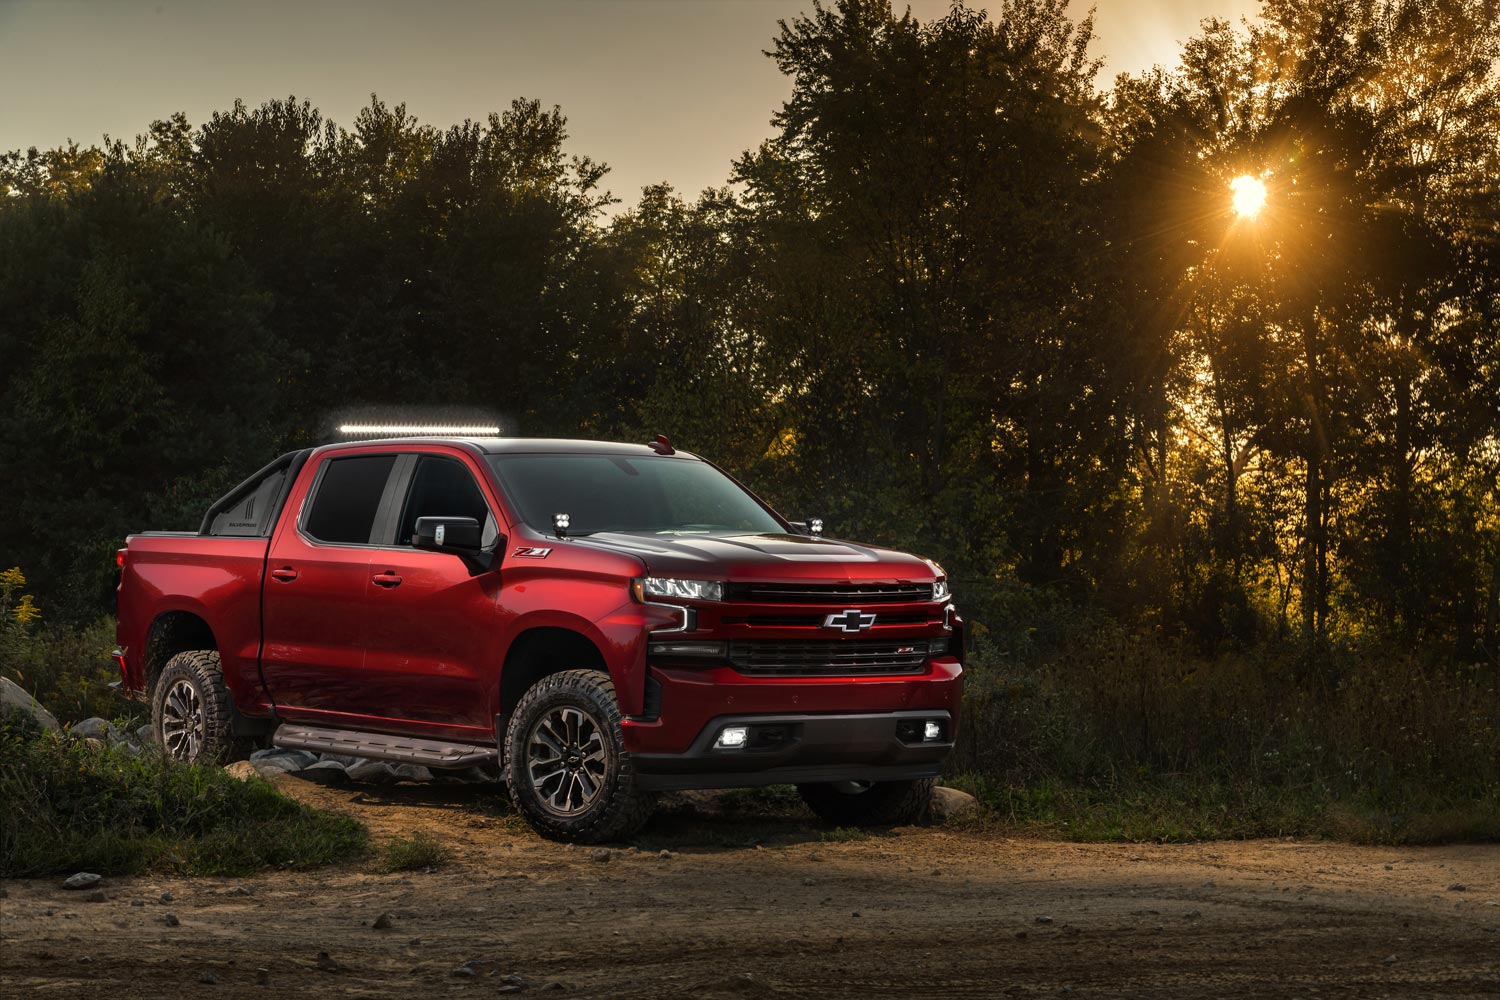 2018 Chevrolet Silverado RST concept truck parked by trees off road.